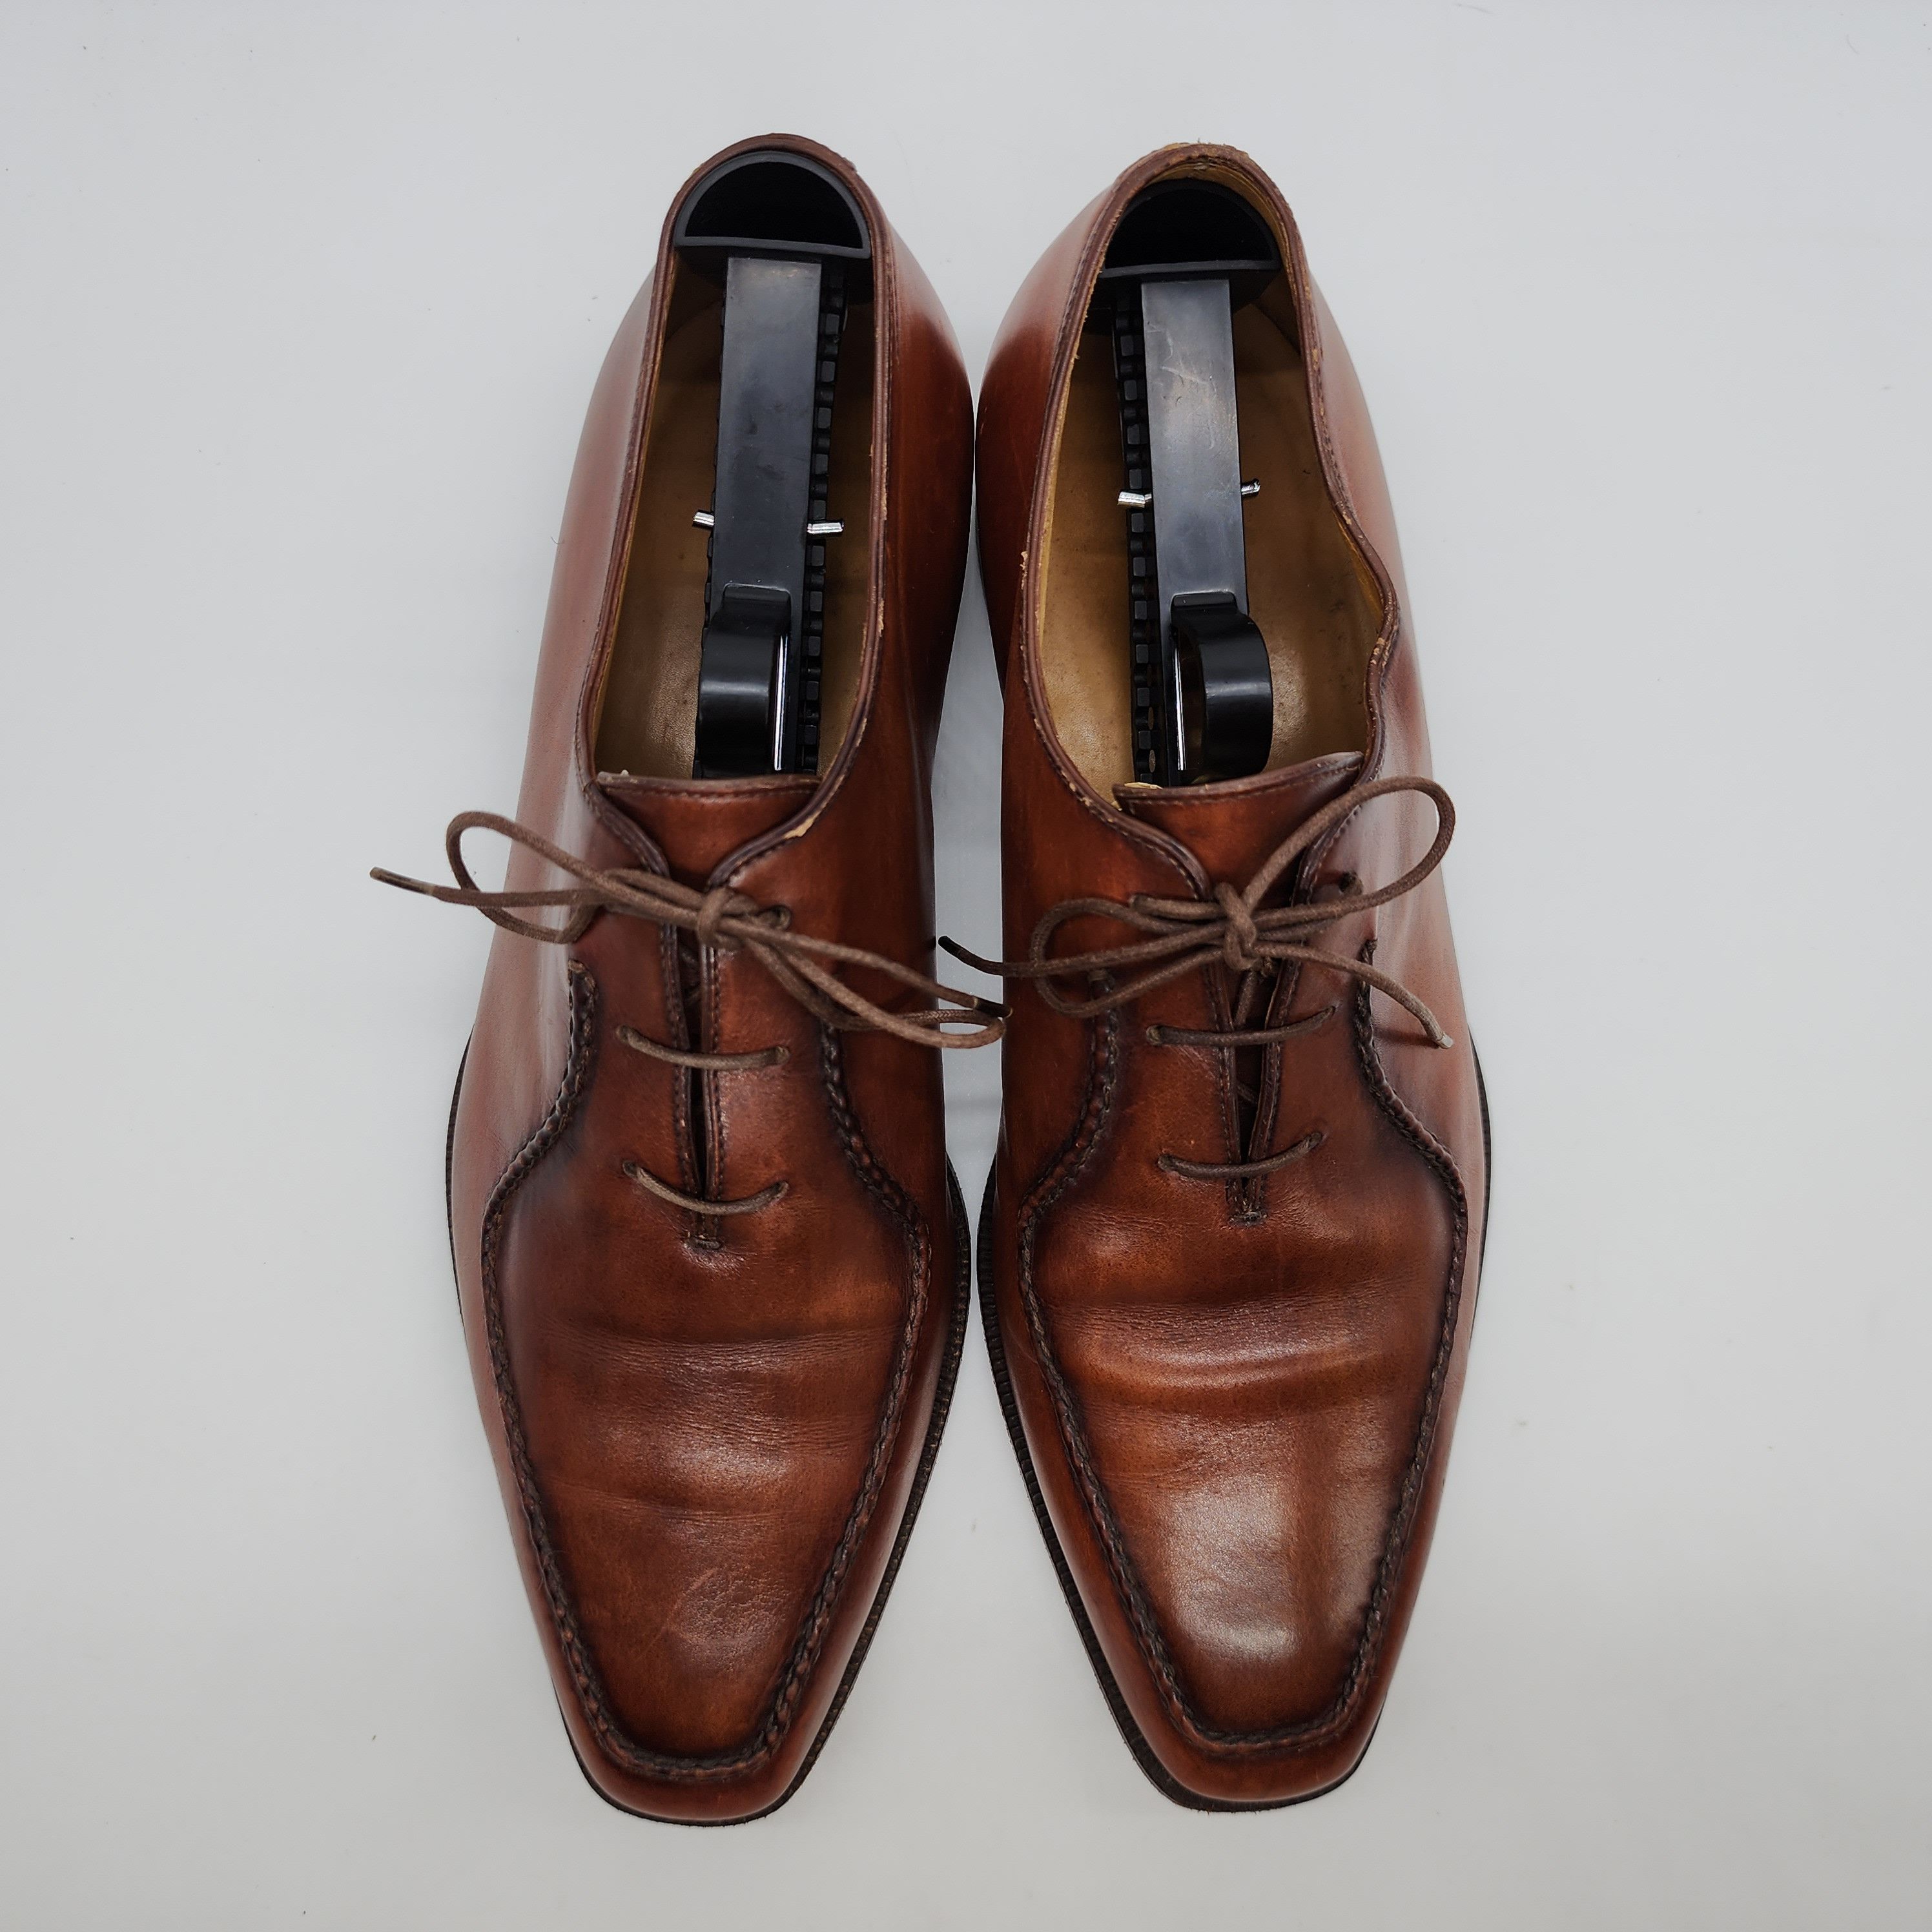 Berluti - Stitched Detail Leather Oxford Shoes - 3